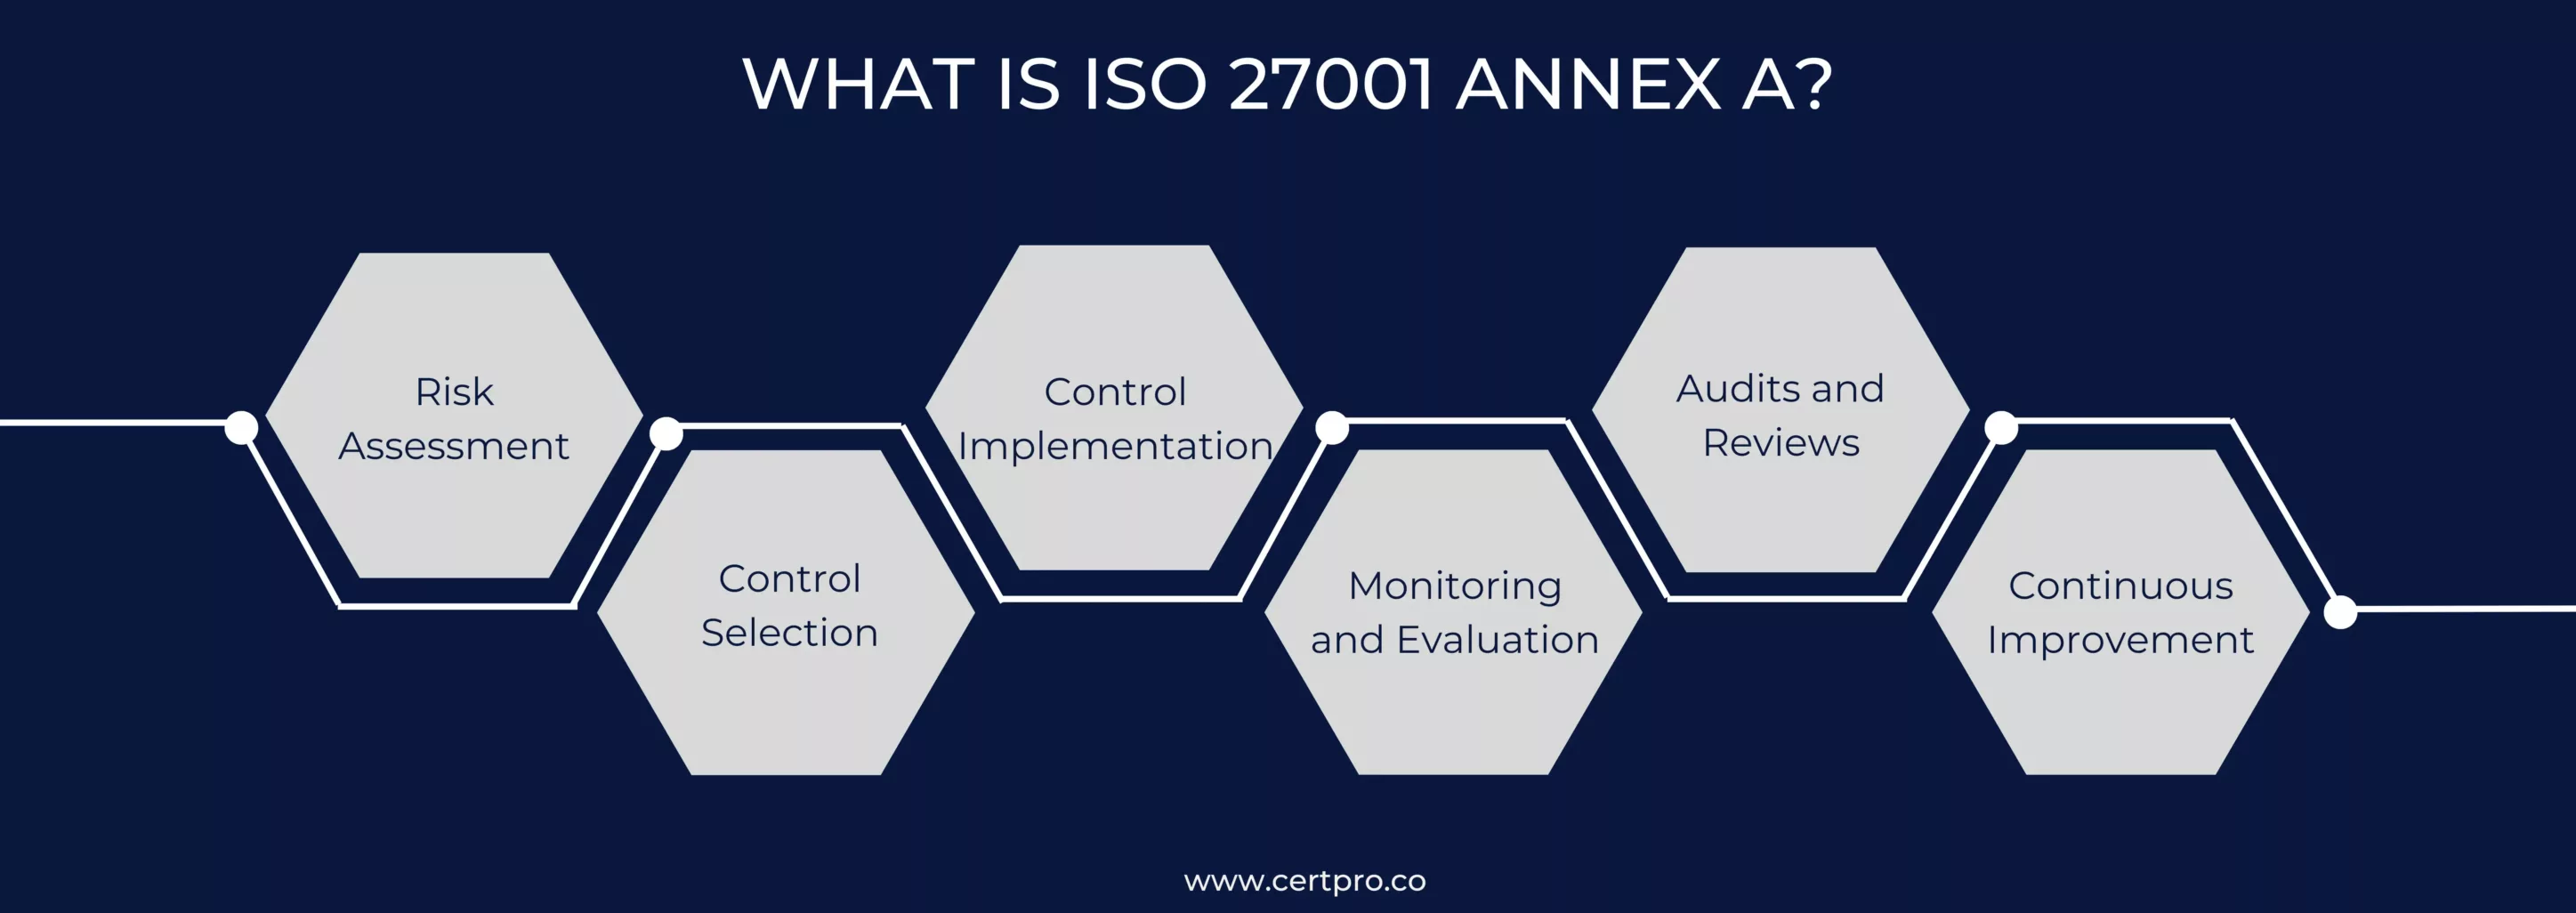 WHAT IS ISO 27001 ANNEX A